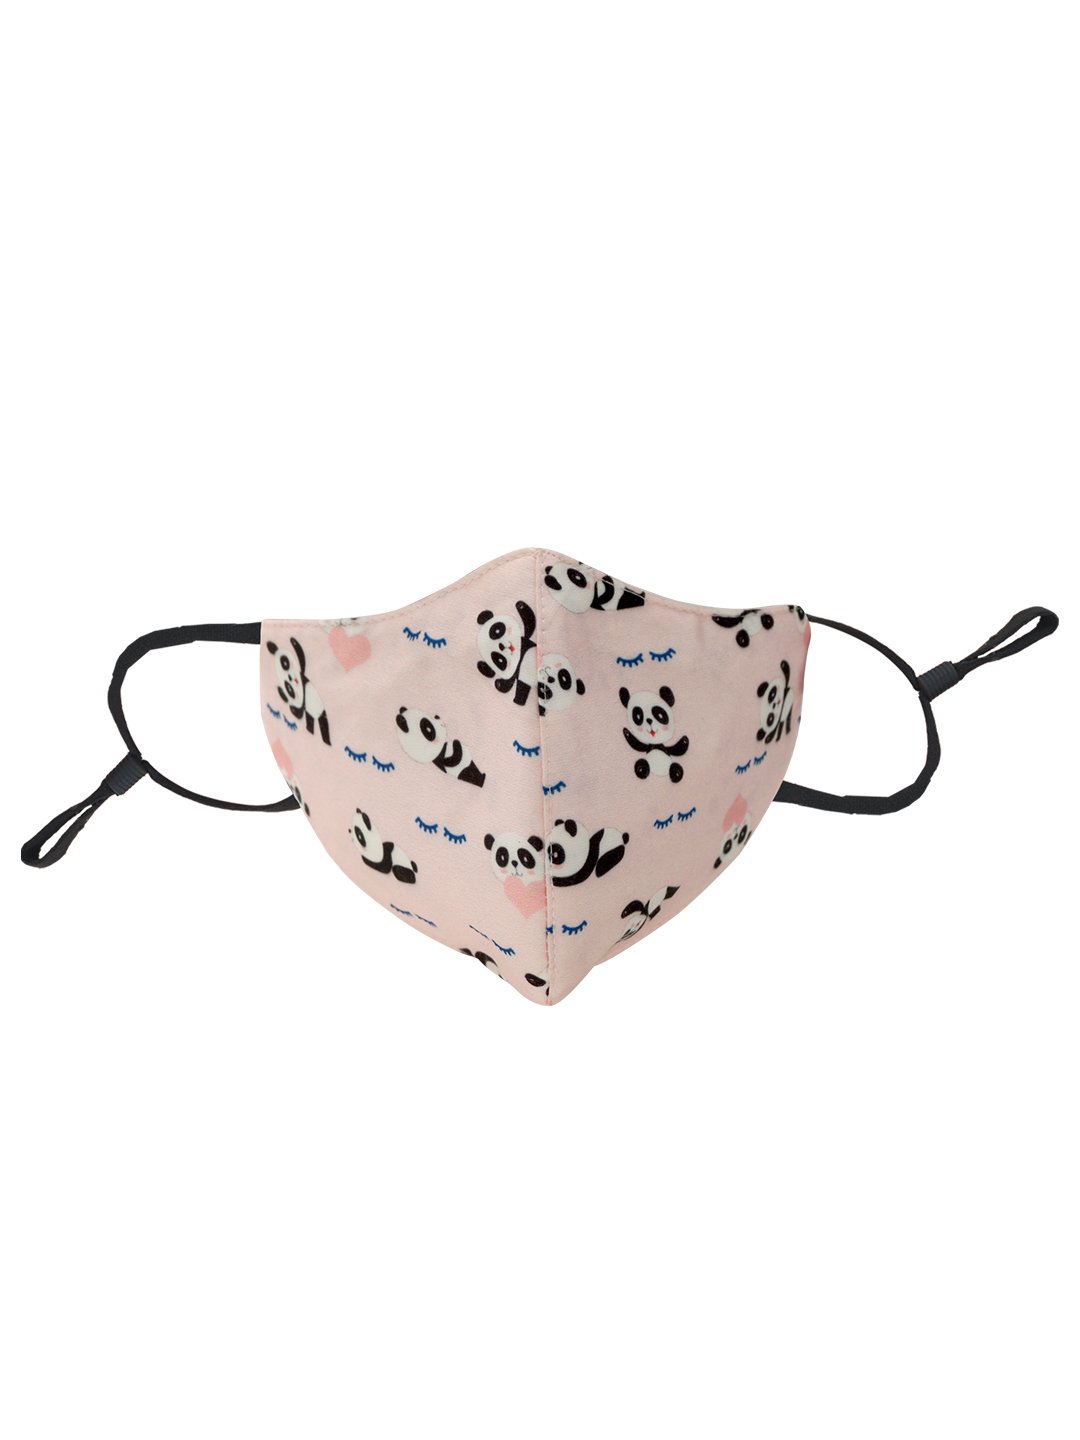 CHICCO COMFYPRO FACE MASK 3-6Y 1 PC-PANDA